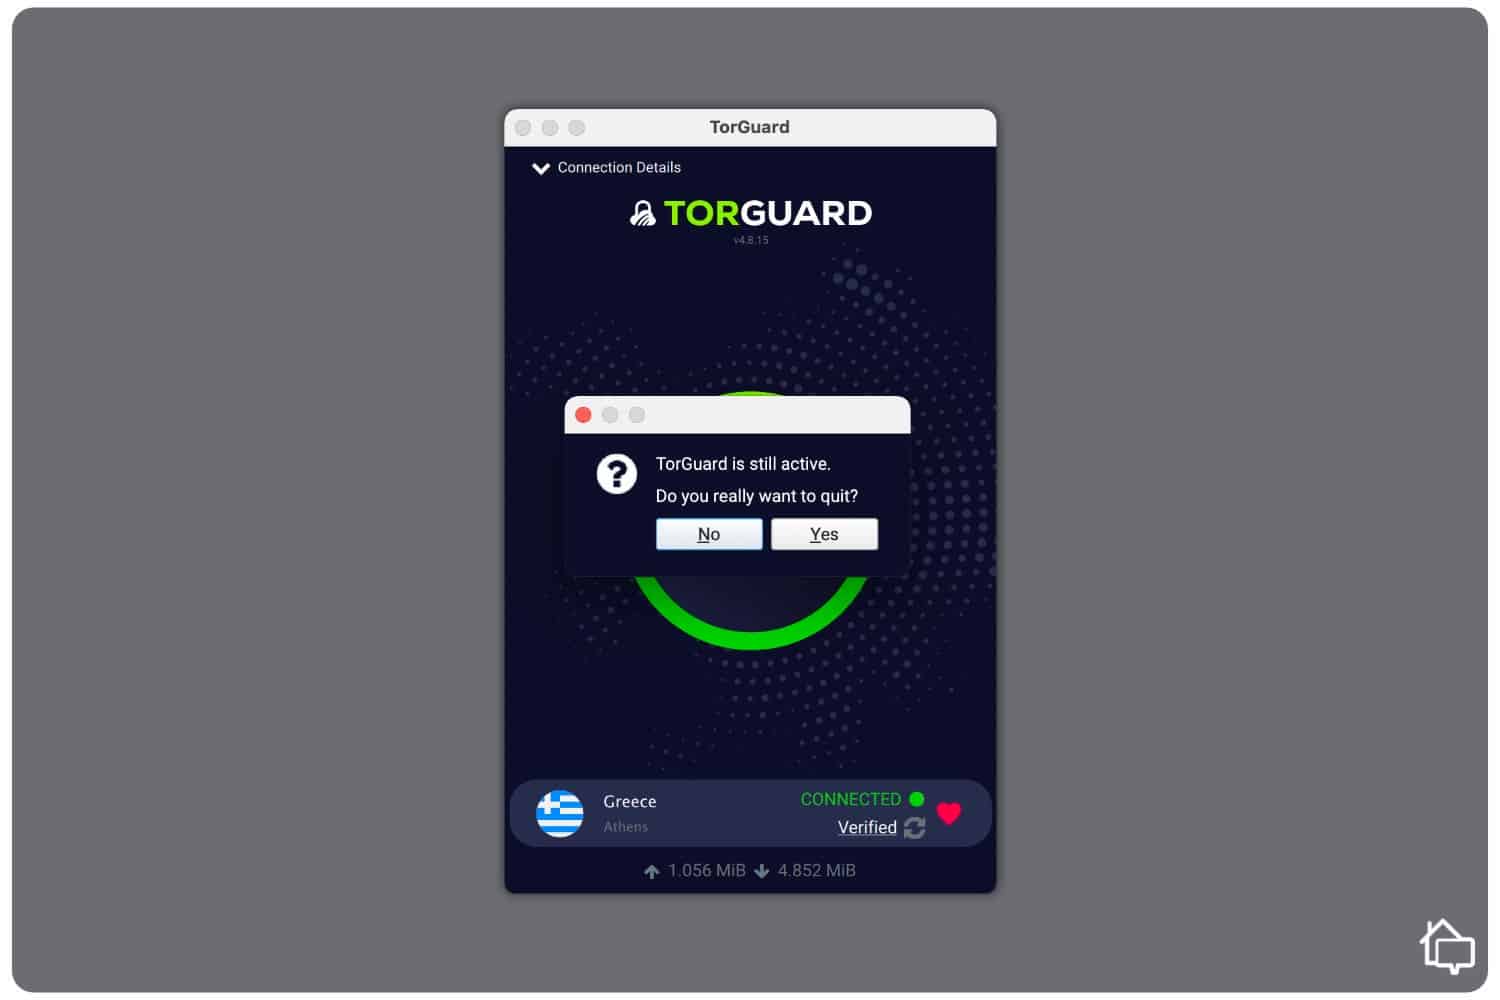 TorGuard alerted me when I tried to quit the app while my VPN was still connected.